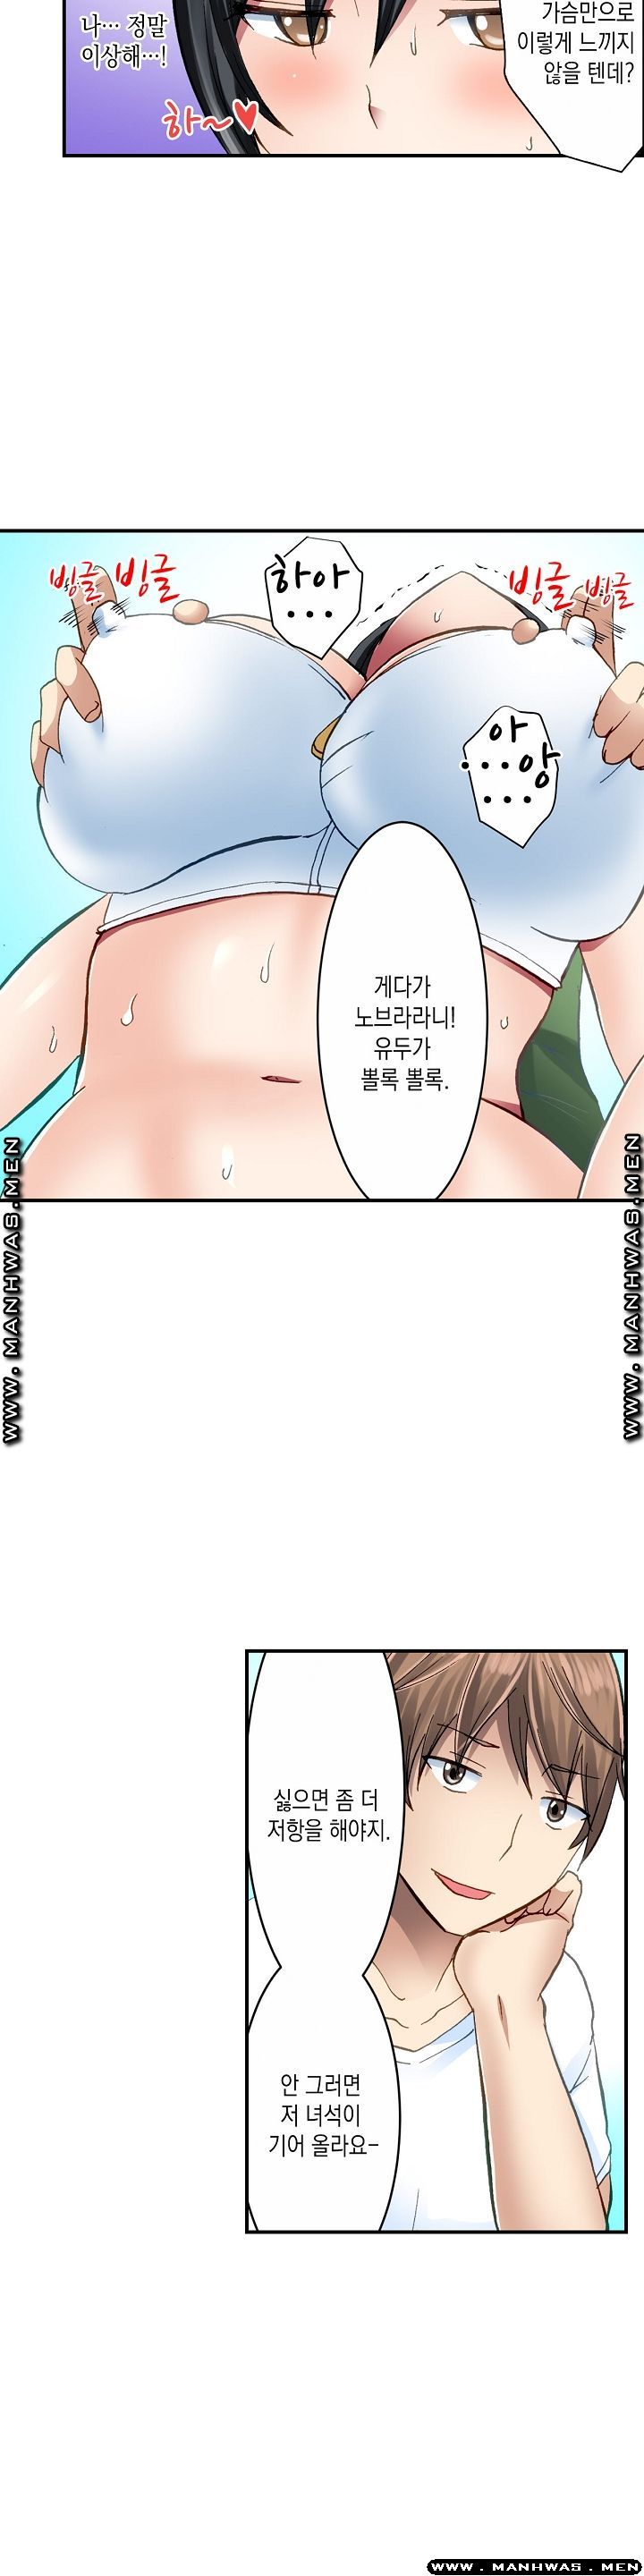 Nude Dance Raw - Chapter 11 Page 3